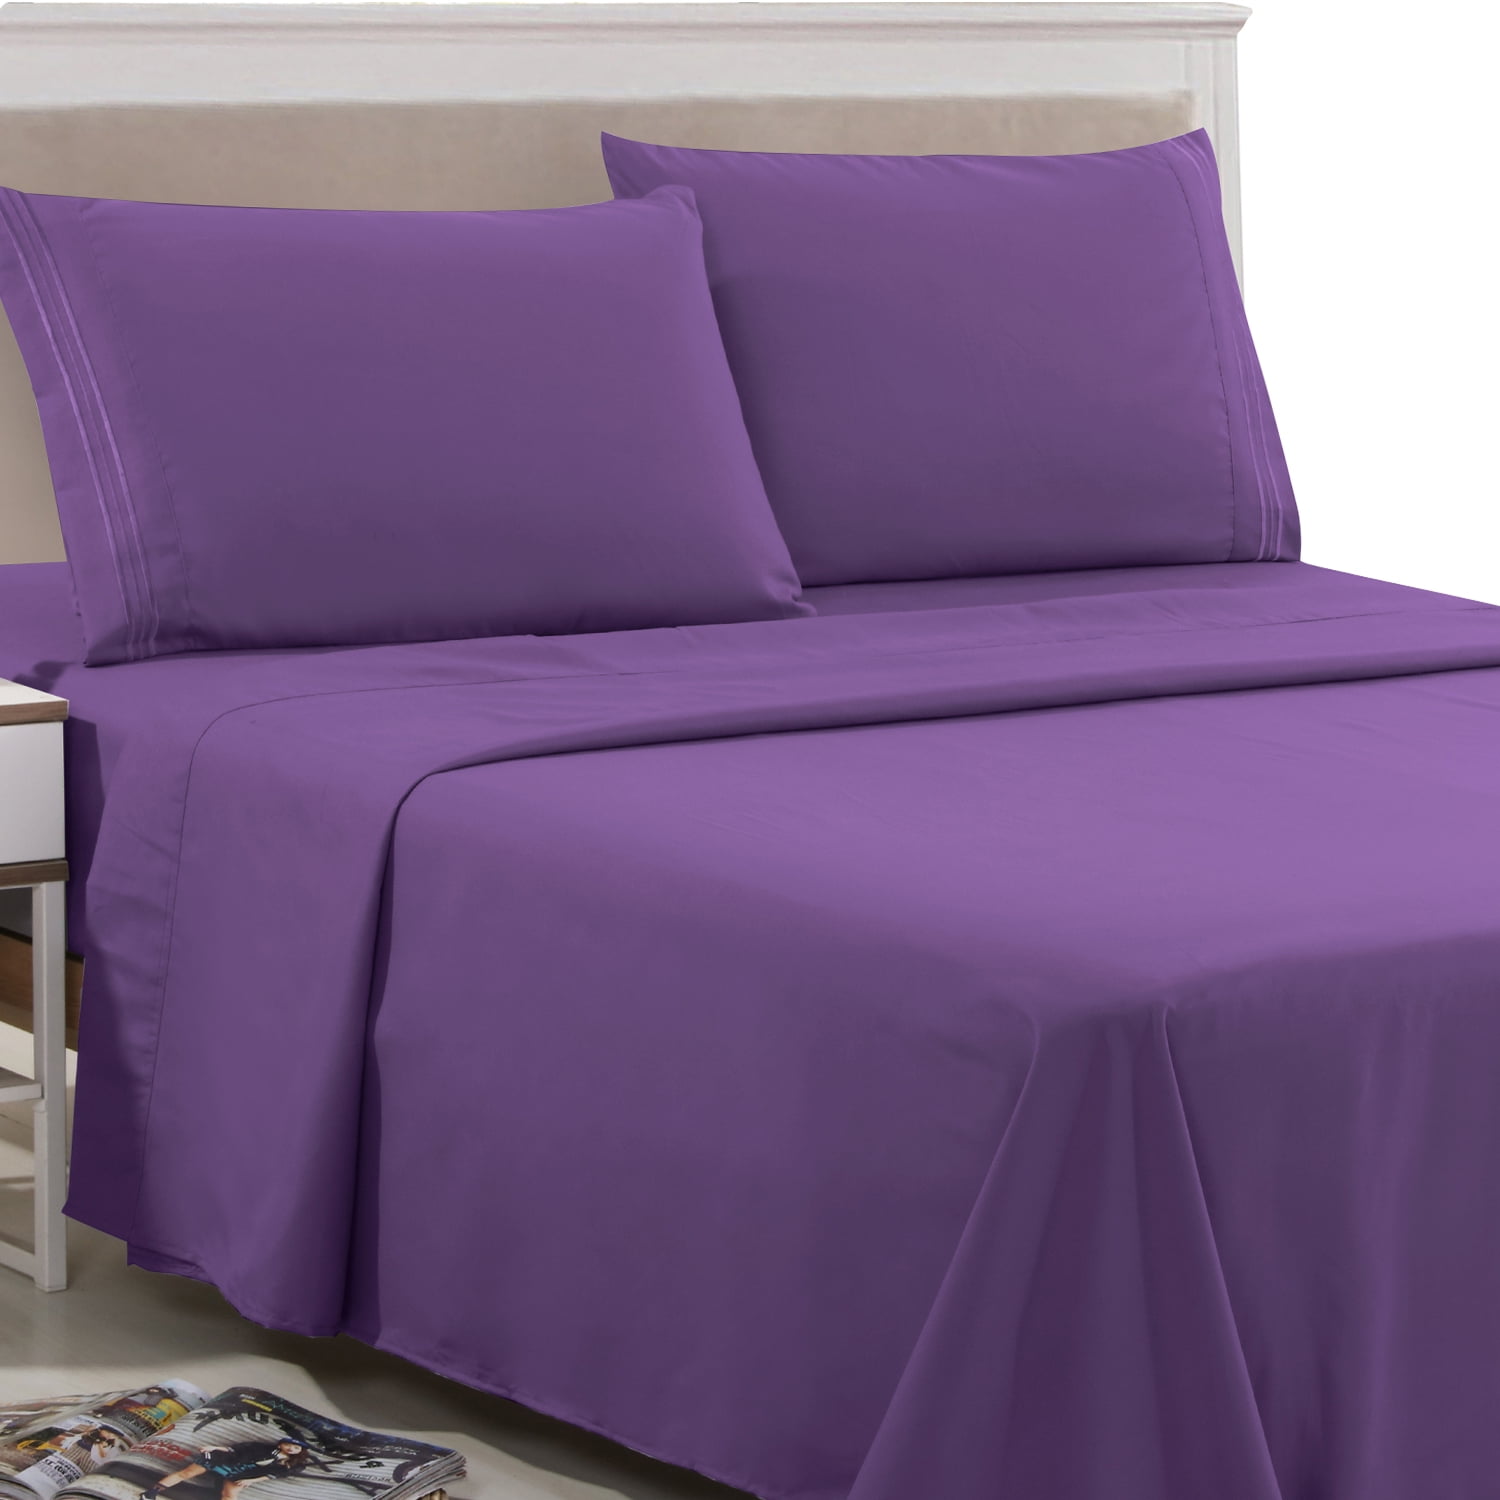 Twin Size Bed Sheets 3 Piece Polyester Twin Deep Pocket Sheets Purple